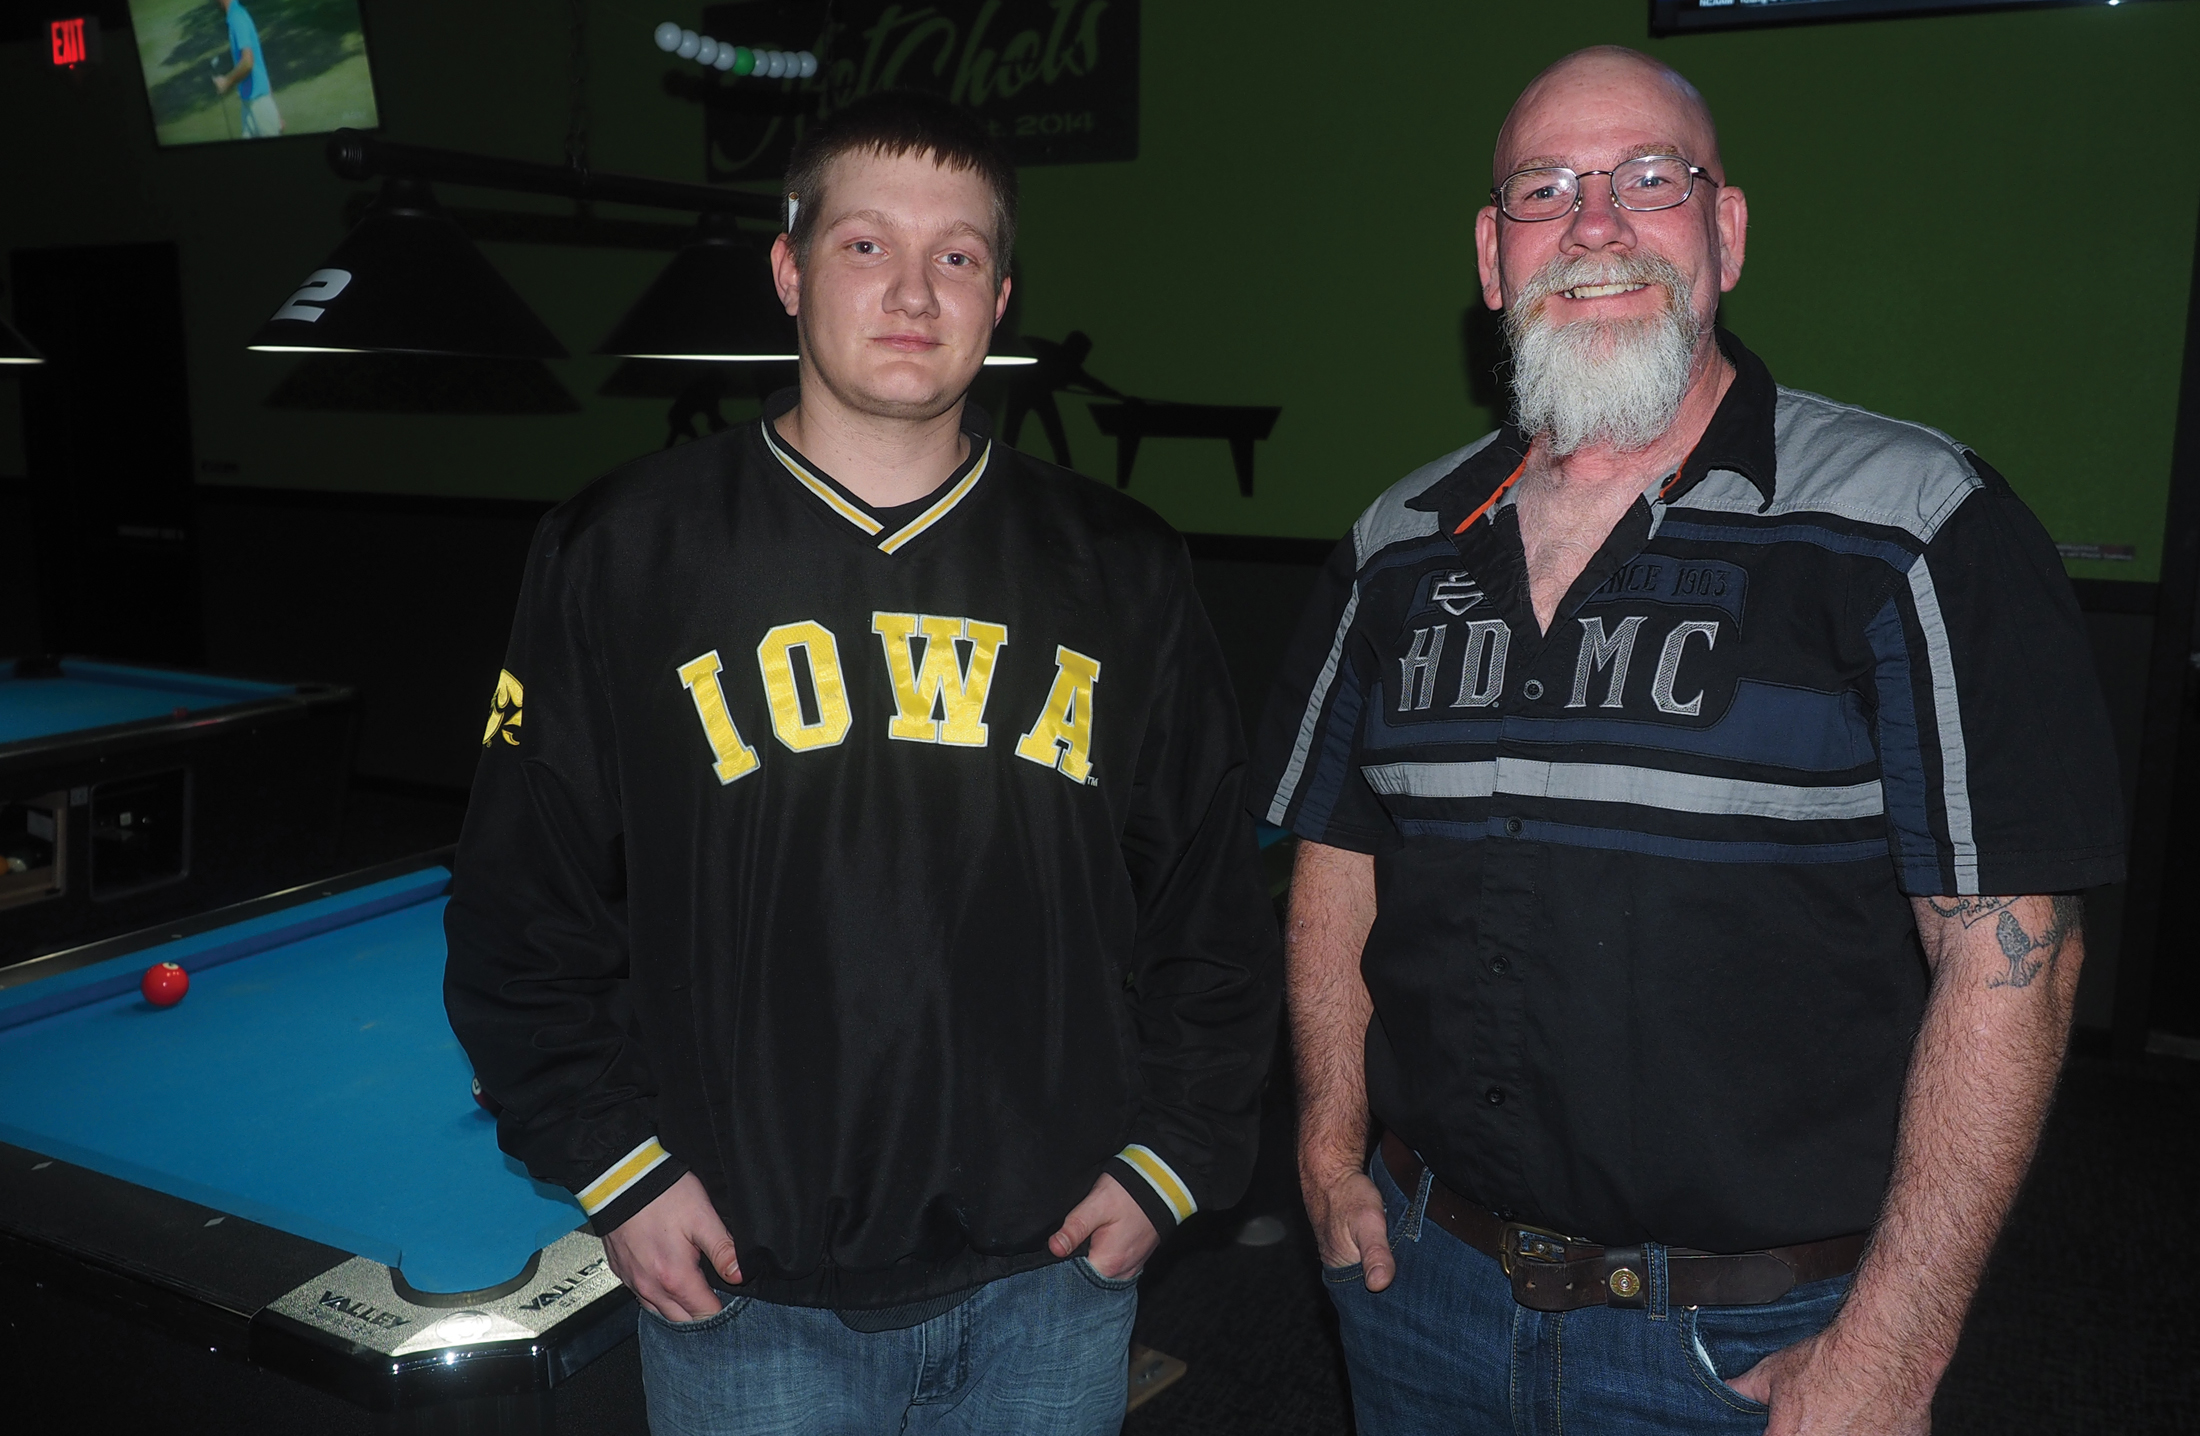 In-house pool league finishes season at ‘new’ house